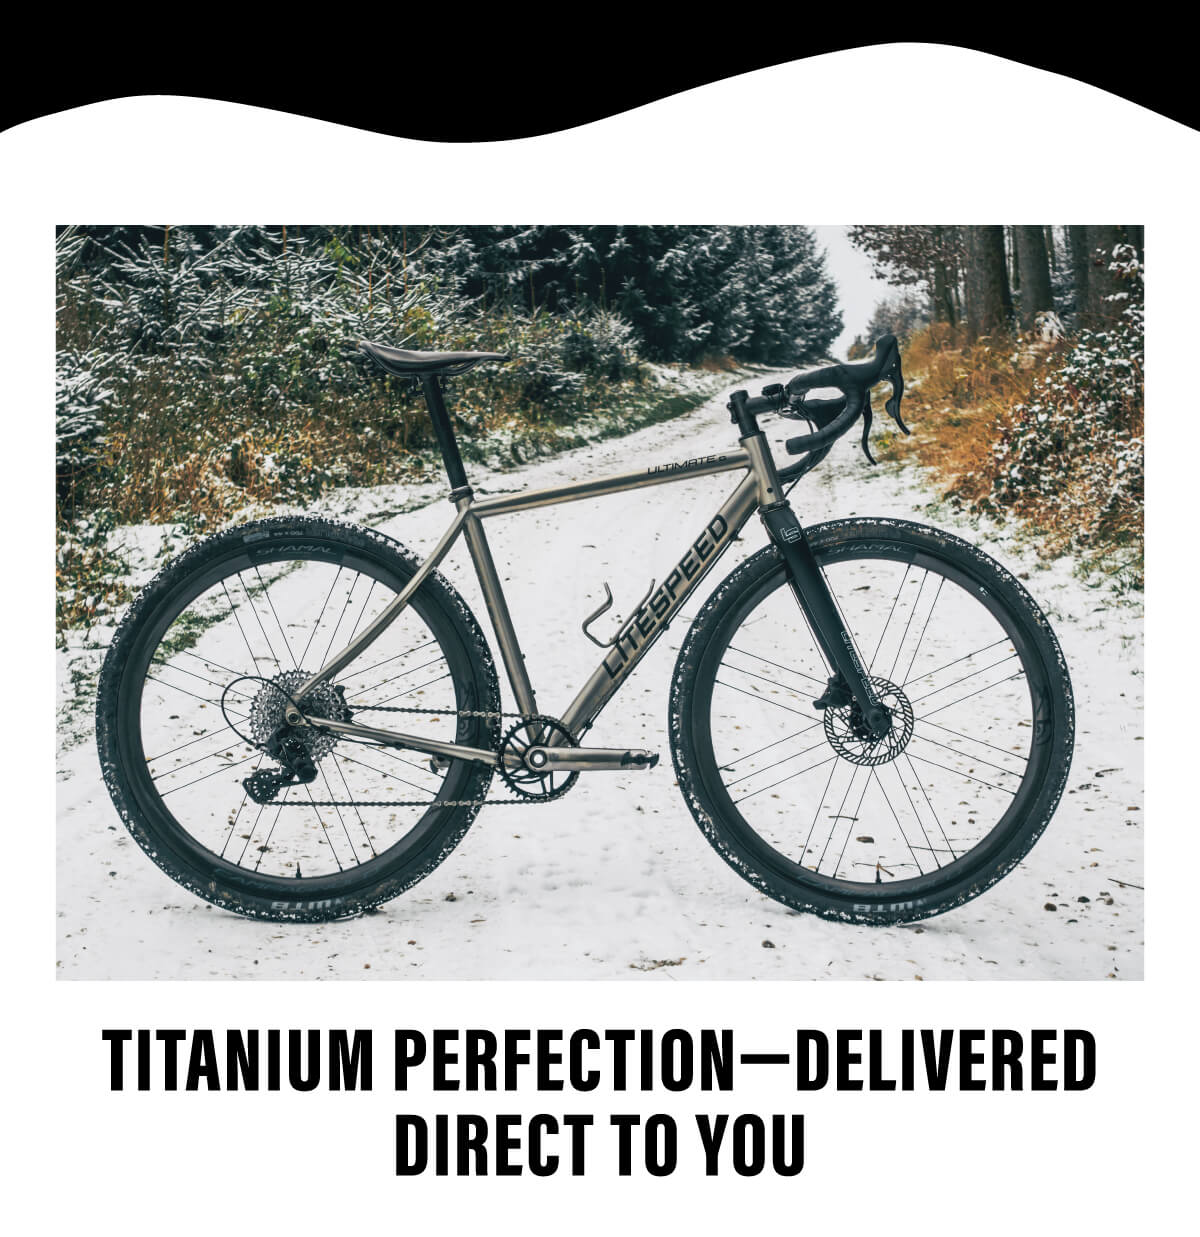 Titanium Perfection-Delivered Direct to you